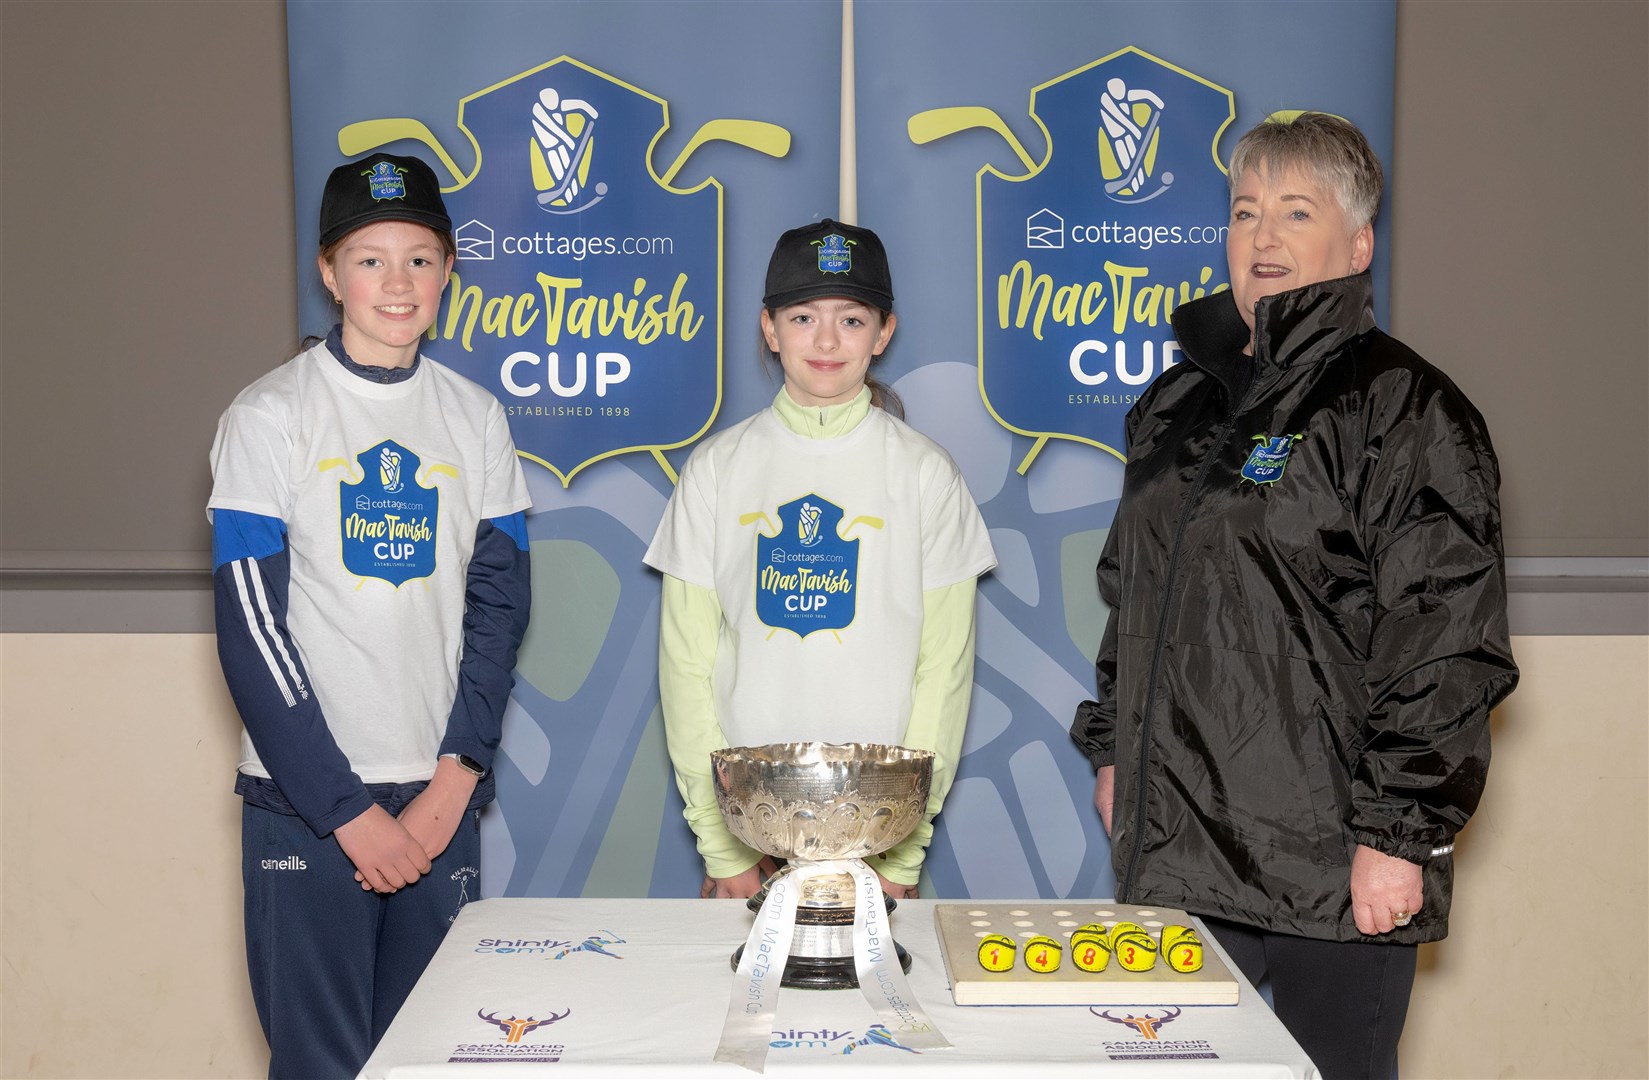 Maisie Ewing & Taylor Cameron (Kilmallie) alongside Heather Grant from sponsors cottages.com after the quarter-final draw. Picture: Neil Paterson